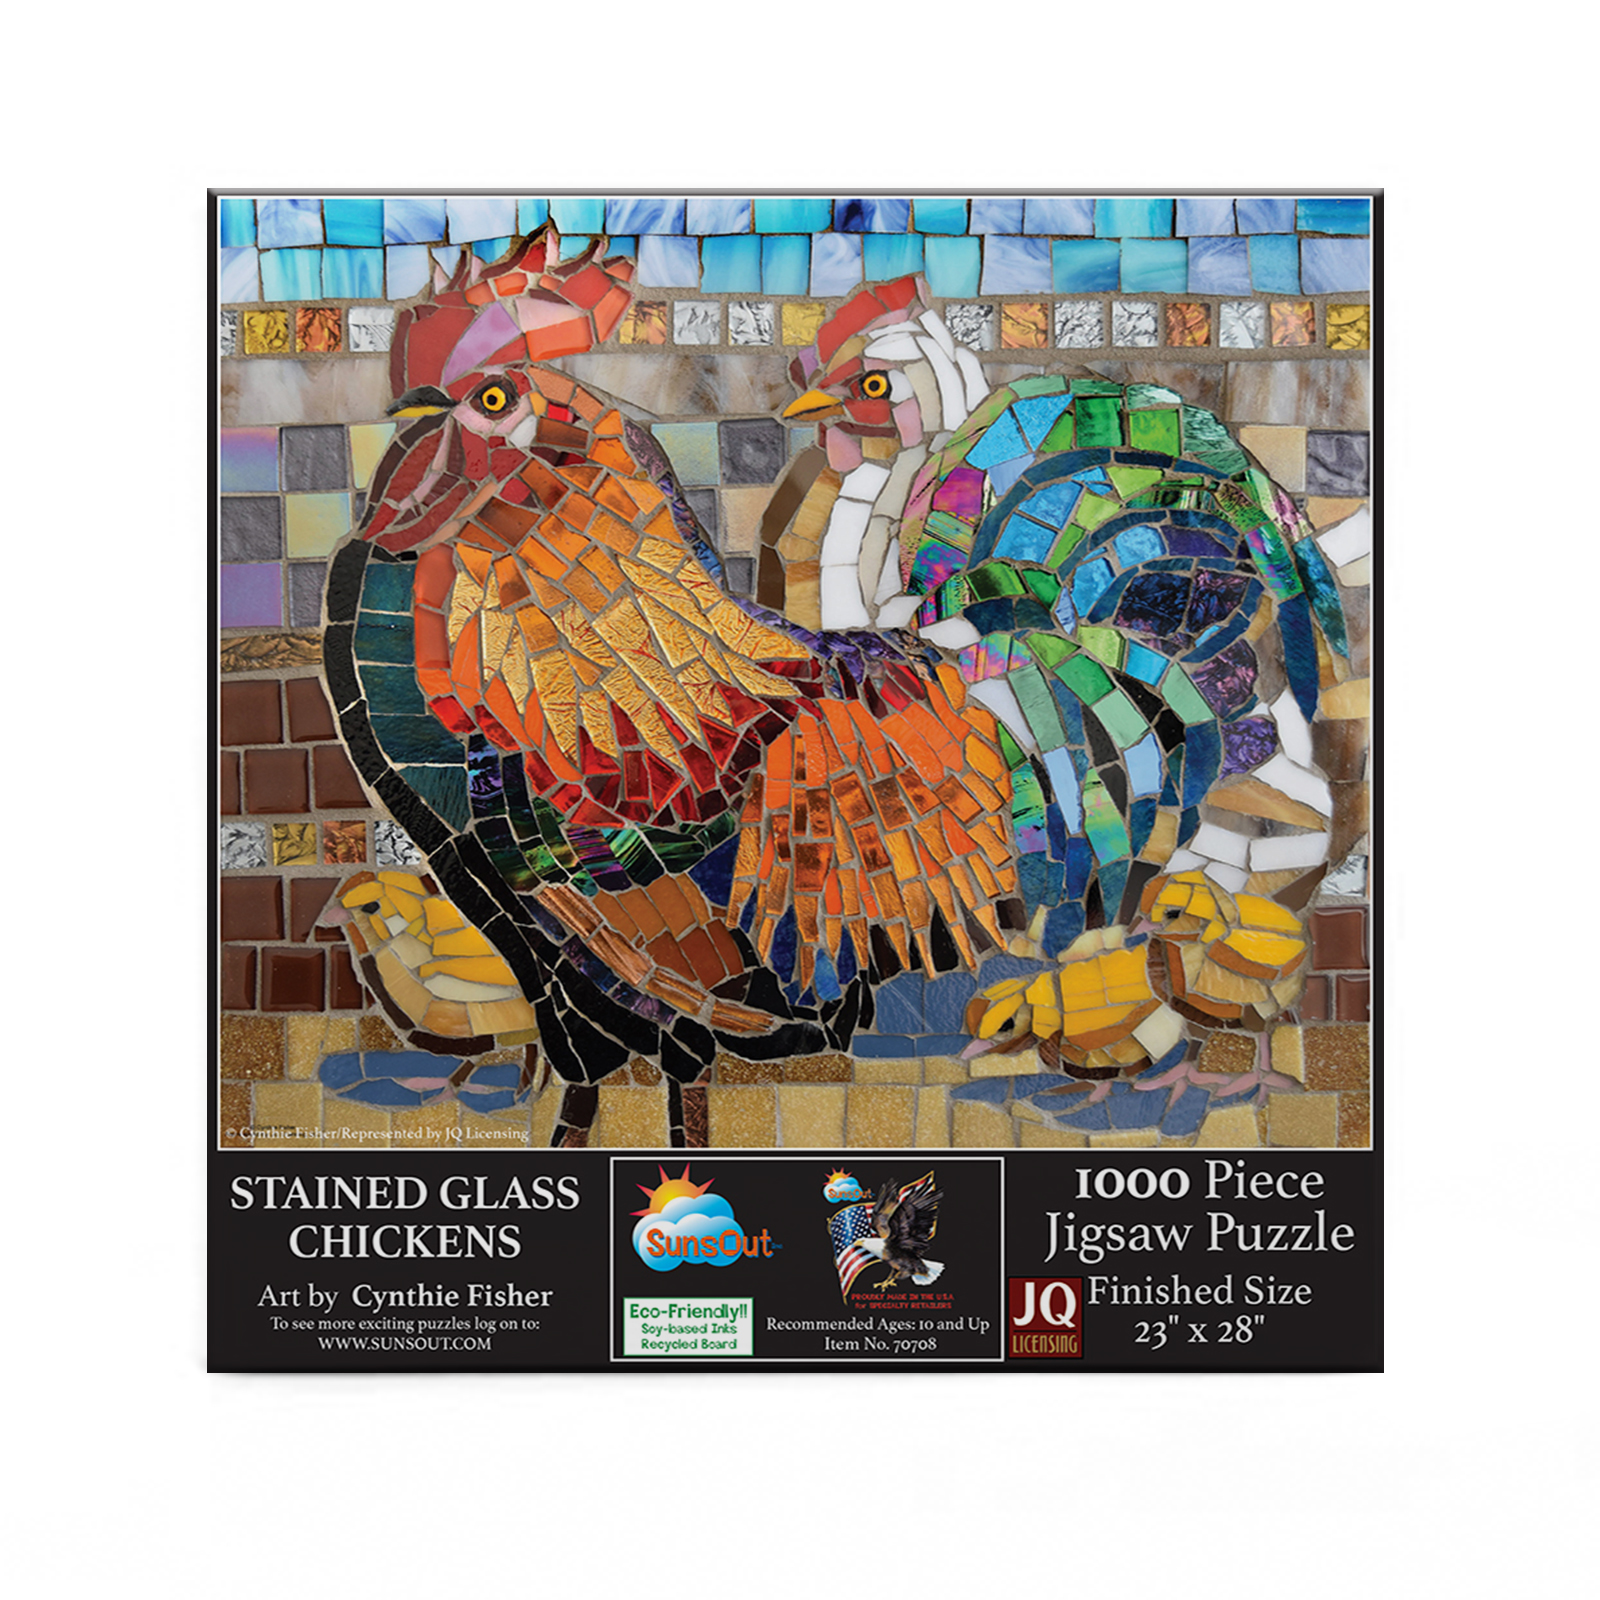 Stained Glass Chickens